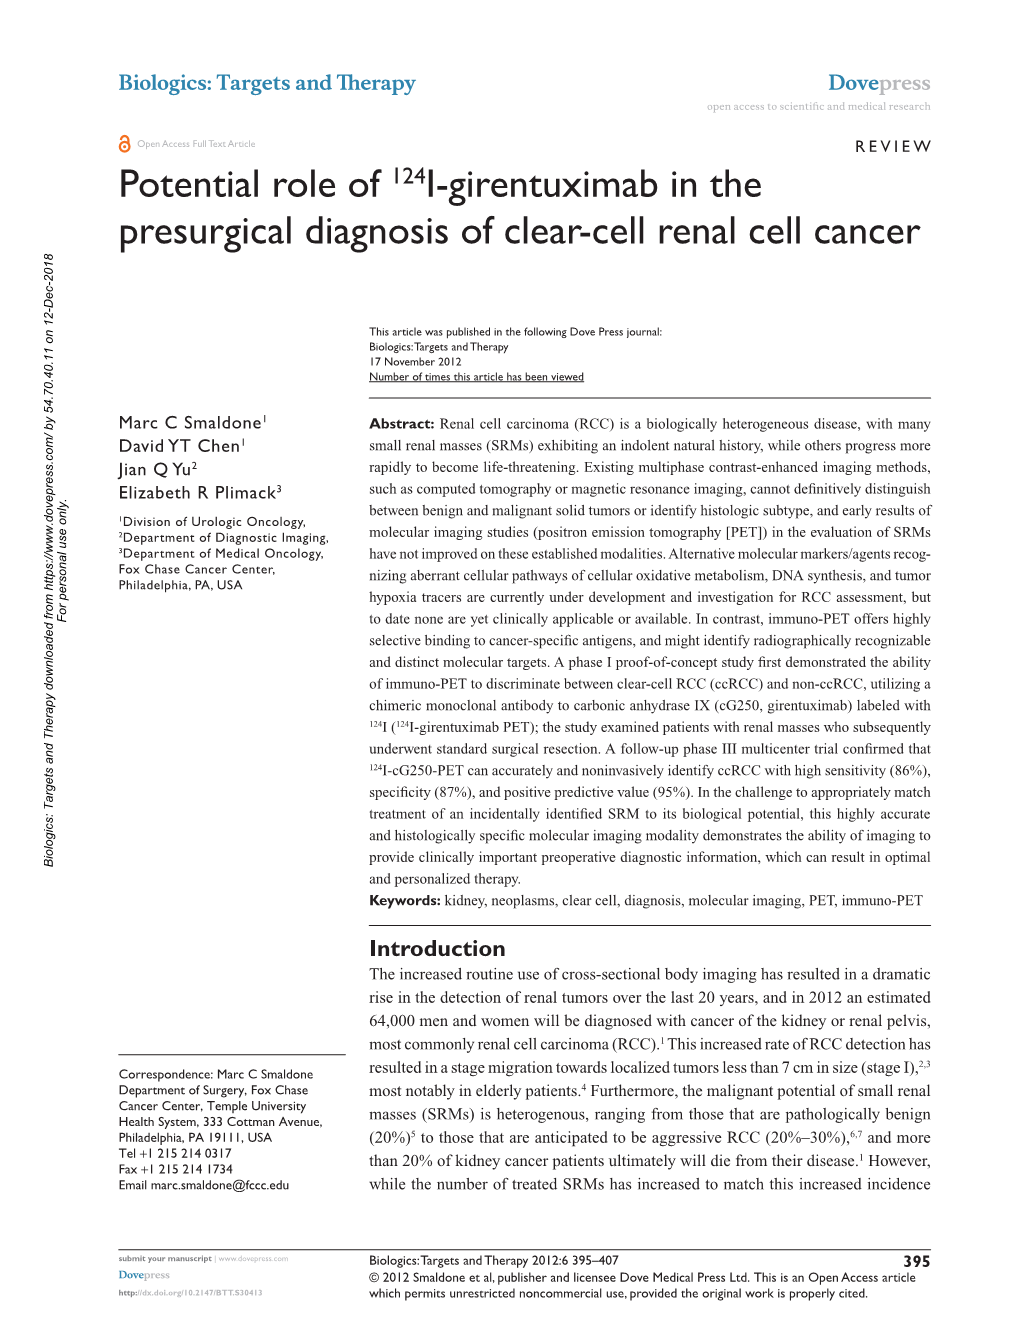 Potential Role of 124I-Girentuximab in the Presurgical Diagnosis of Clear-Cell Renal Cell Cancer